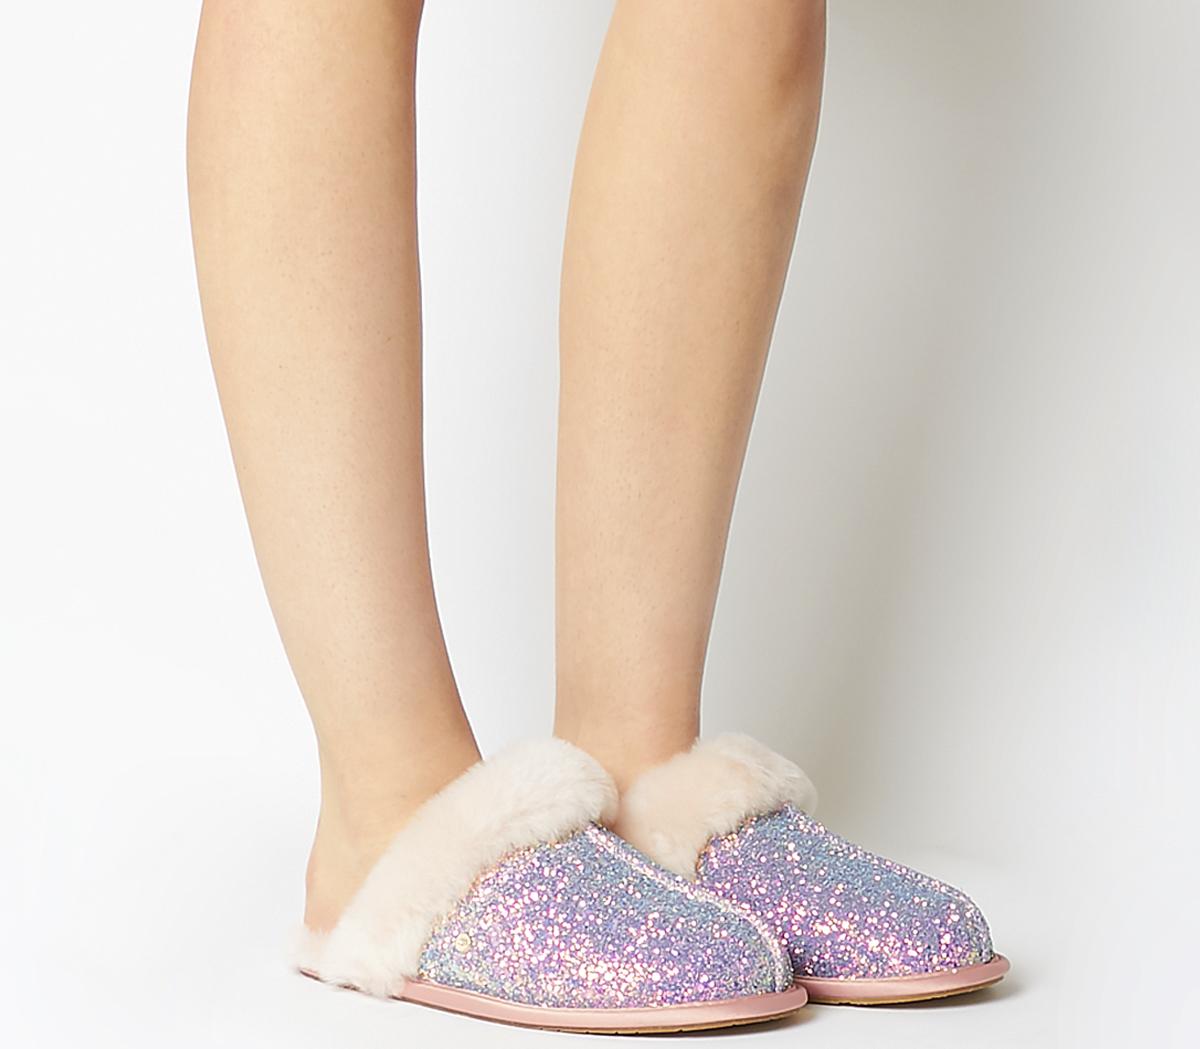 pink sparkly ugg slippers